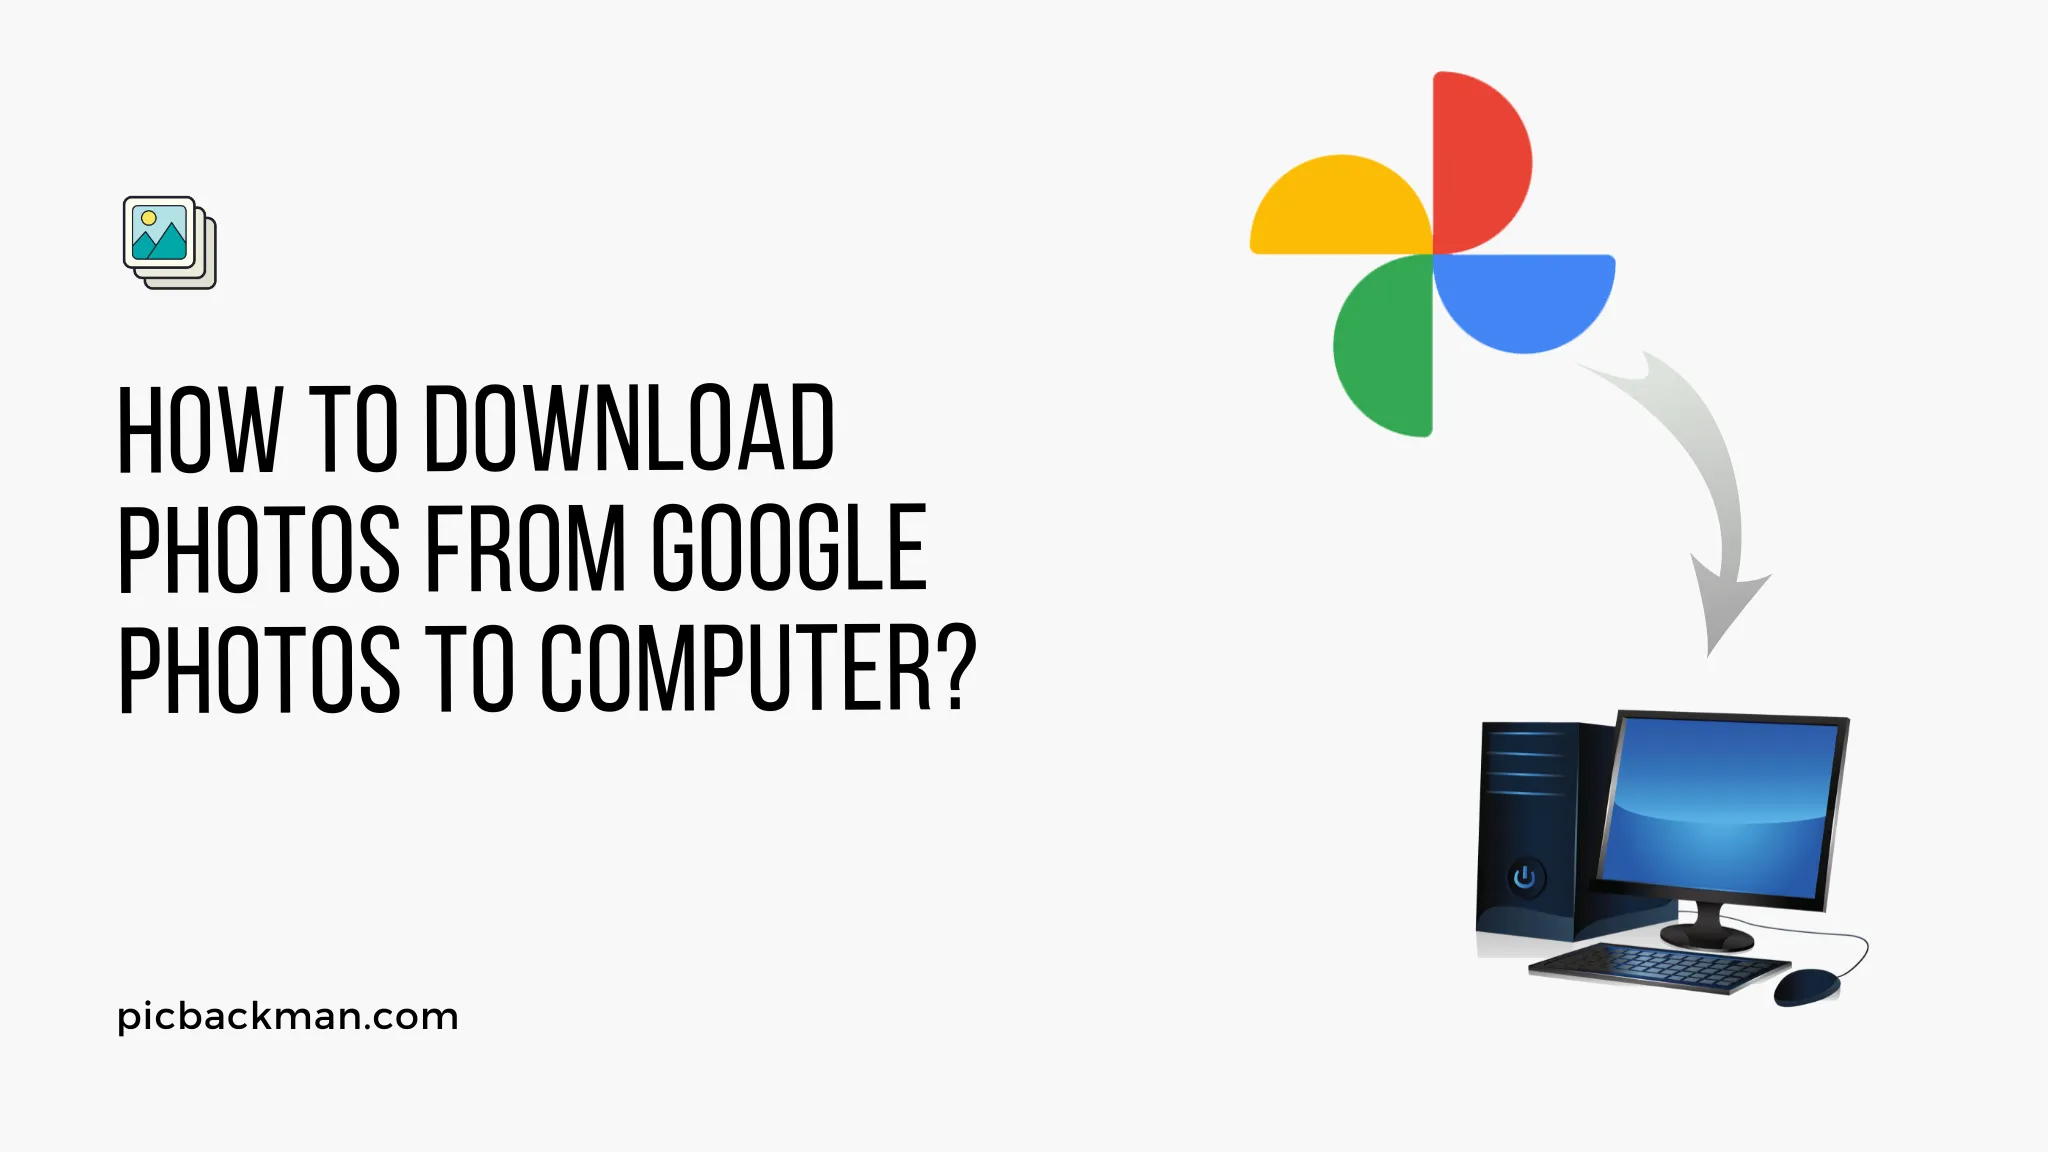 How to Download Photos from Google Photos to Computer